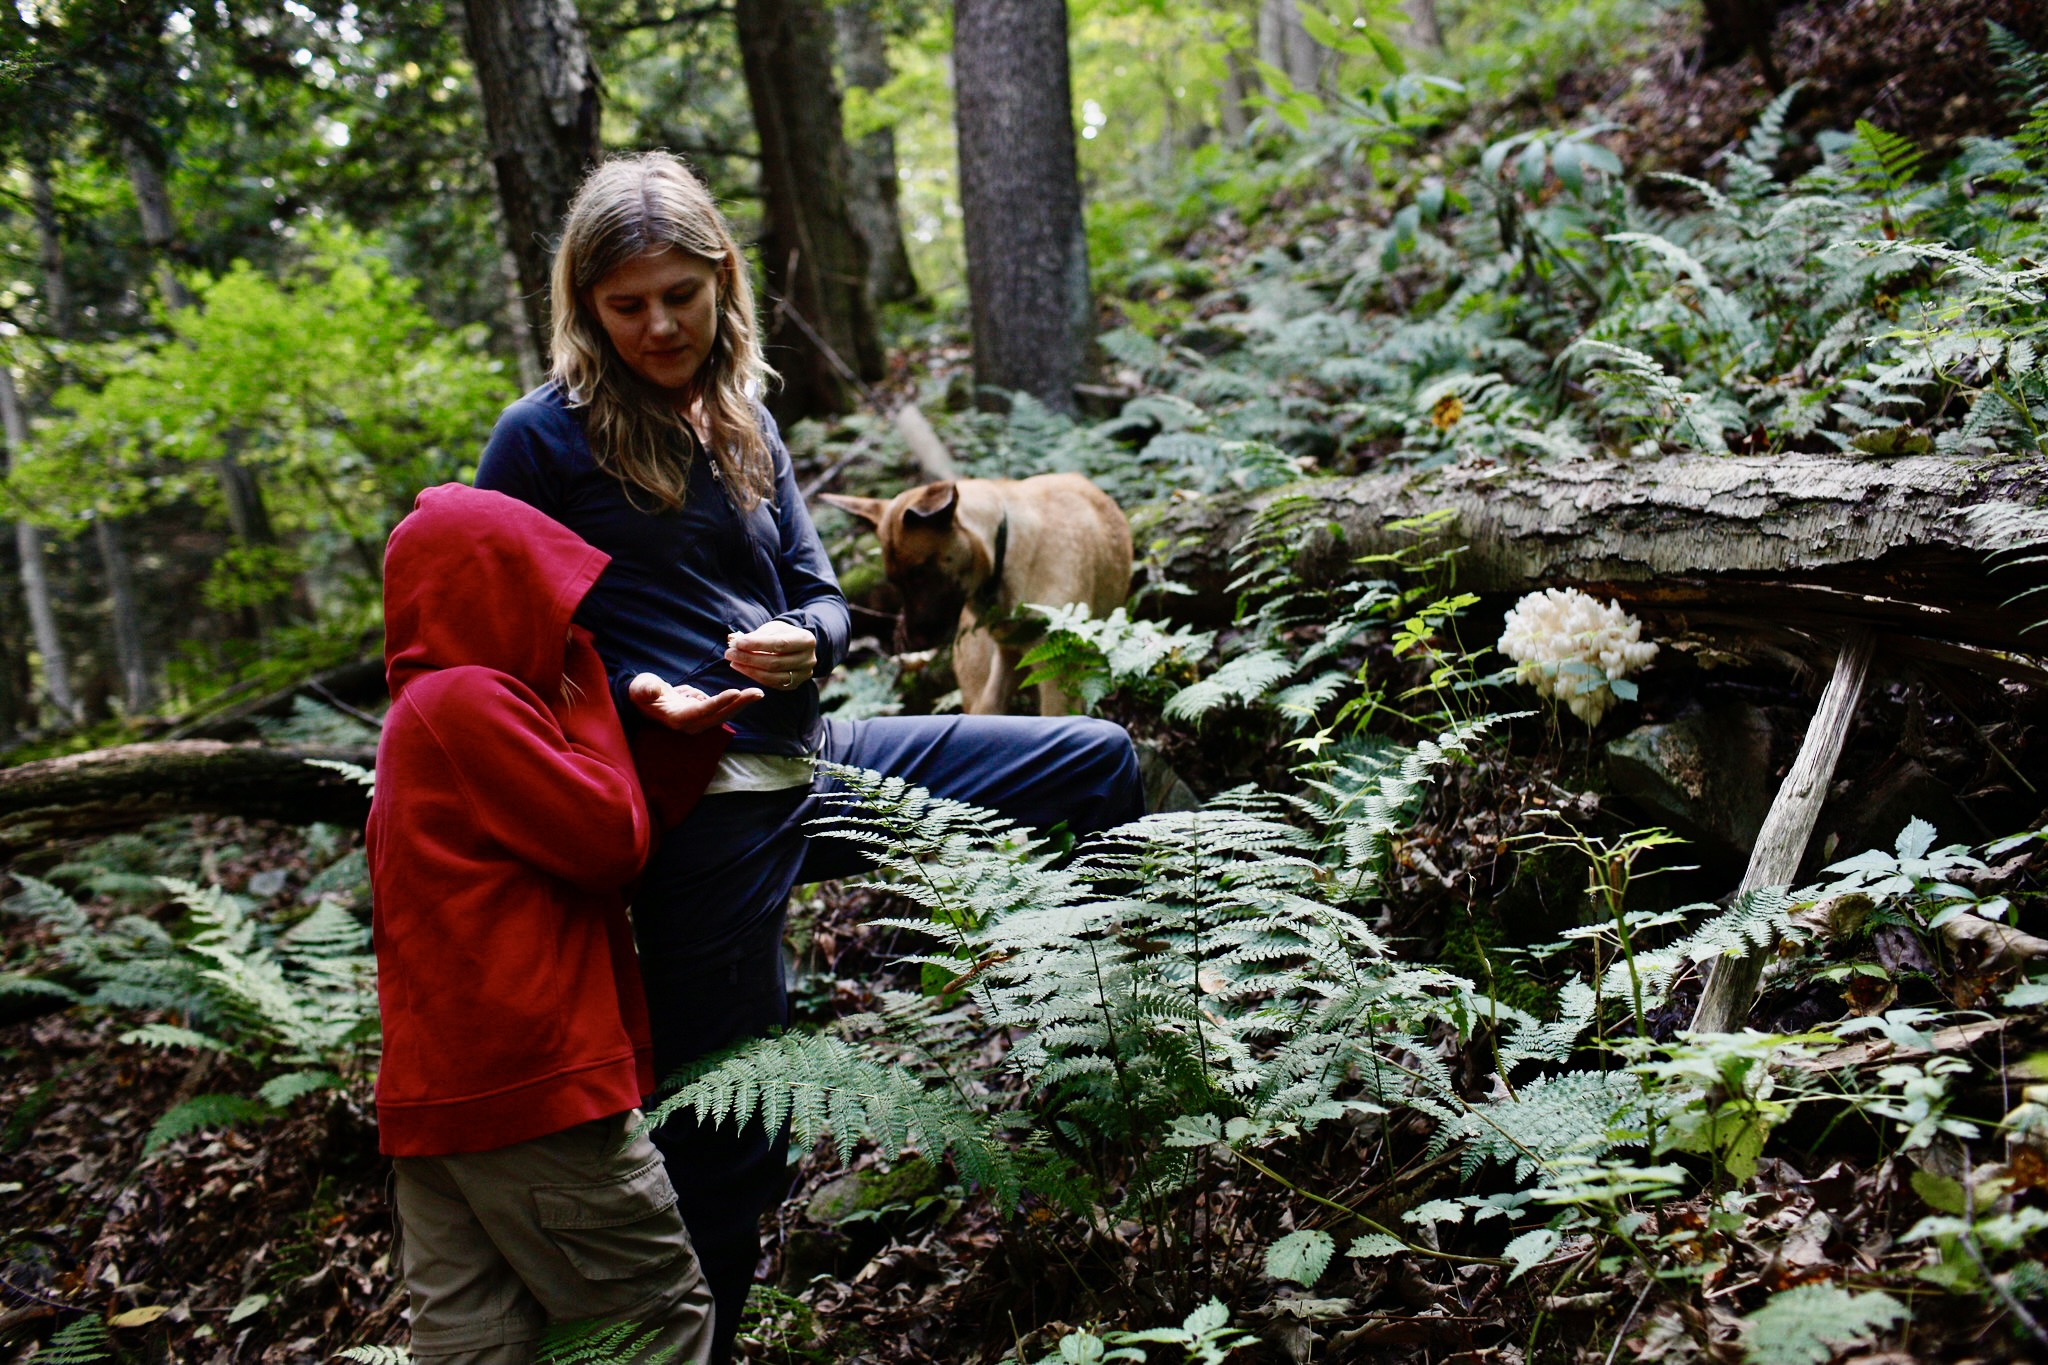 Woman, young girl, and dog walking through a mature forest in Maryland